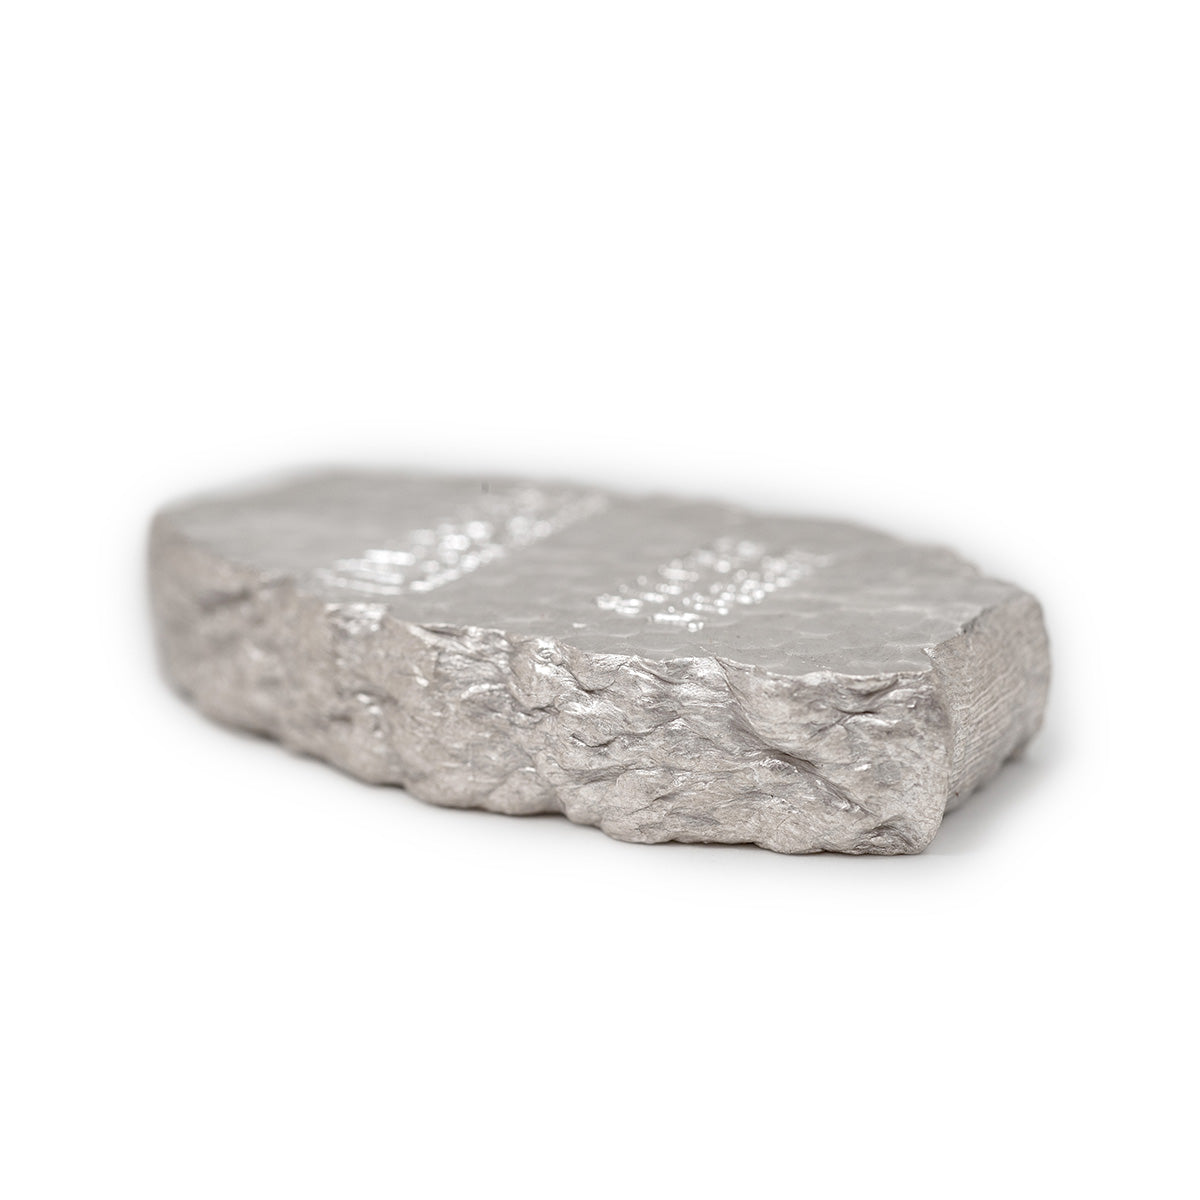 Scottsdale Tombstone Nugget 5 oz Silver Bar